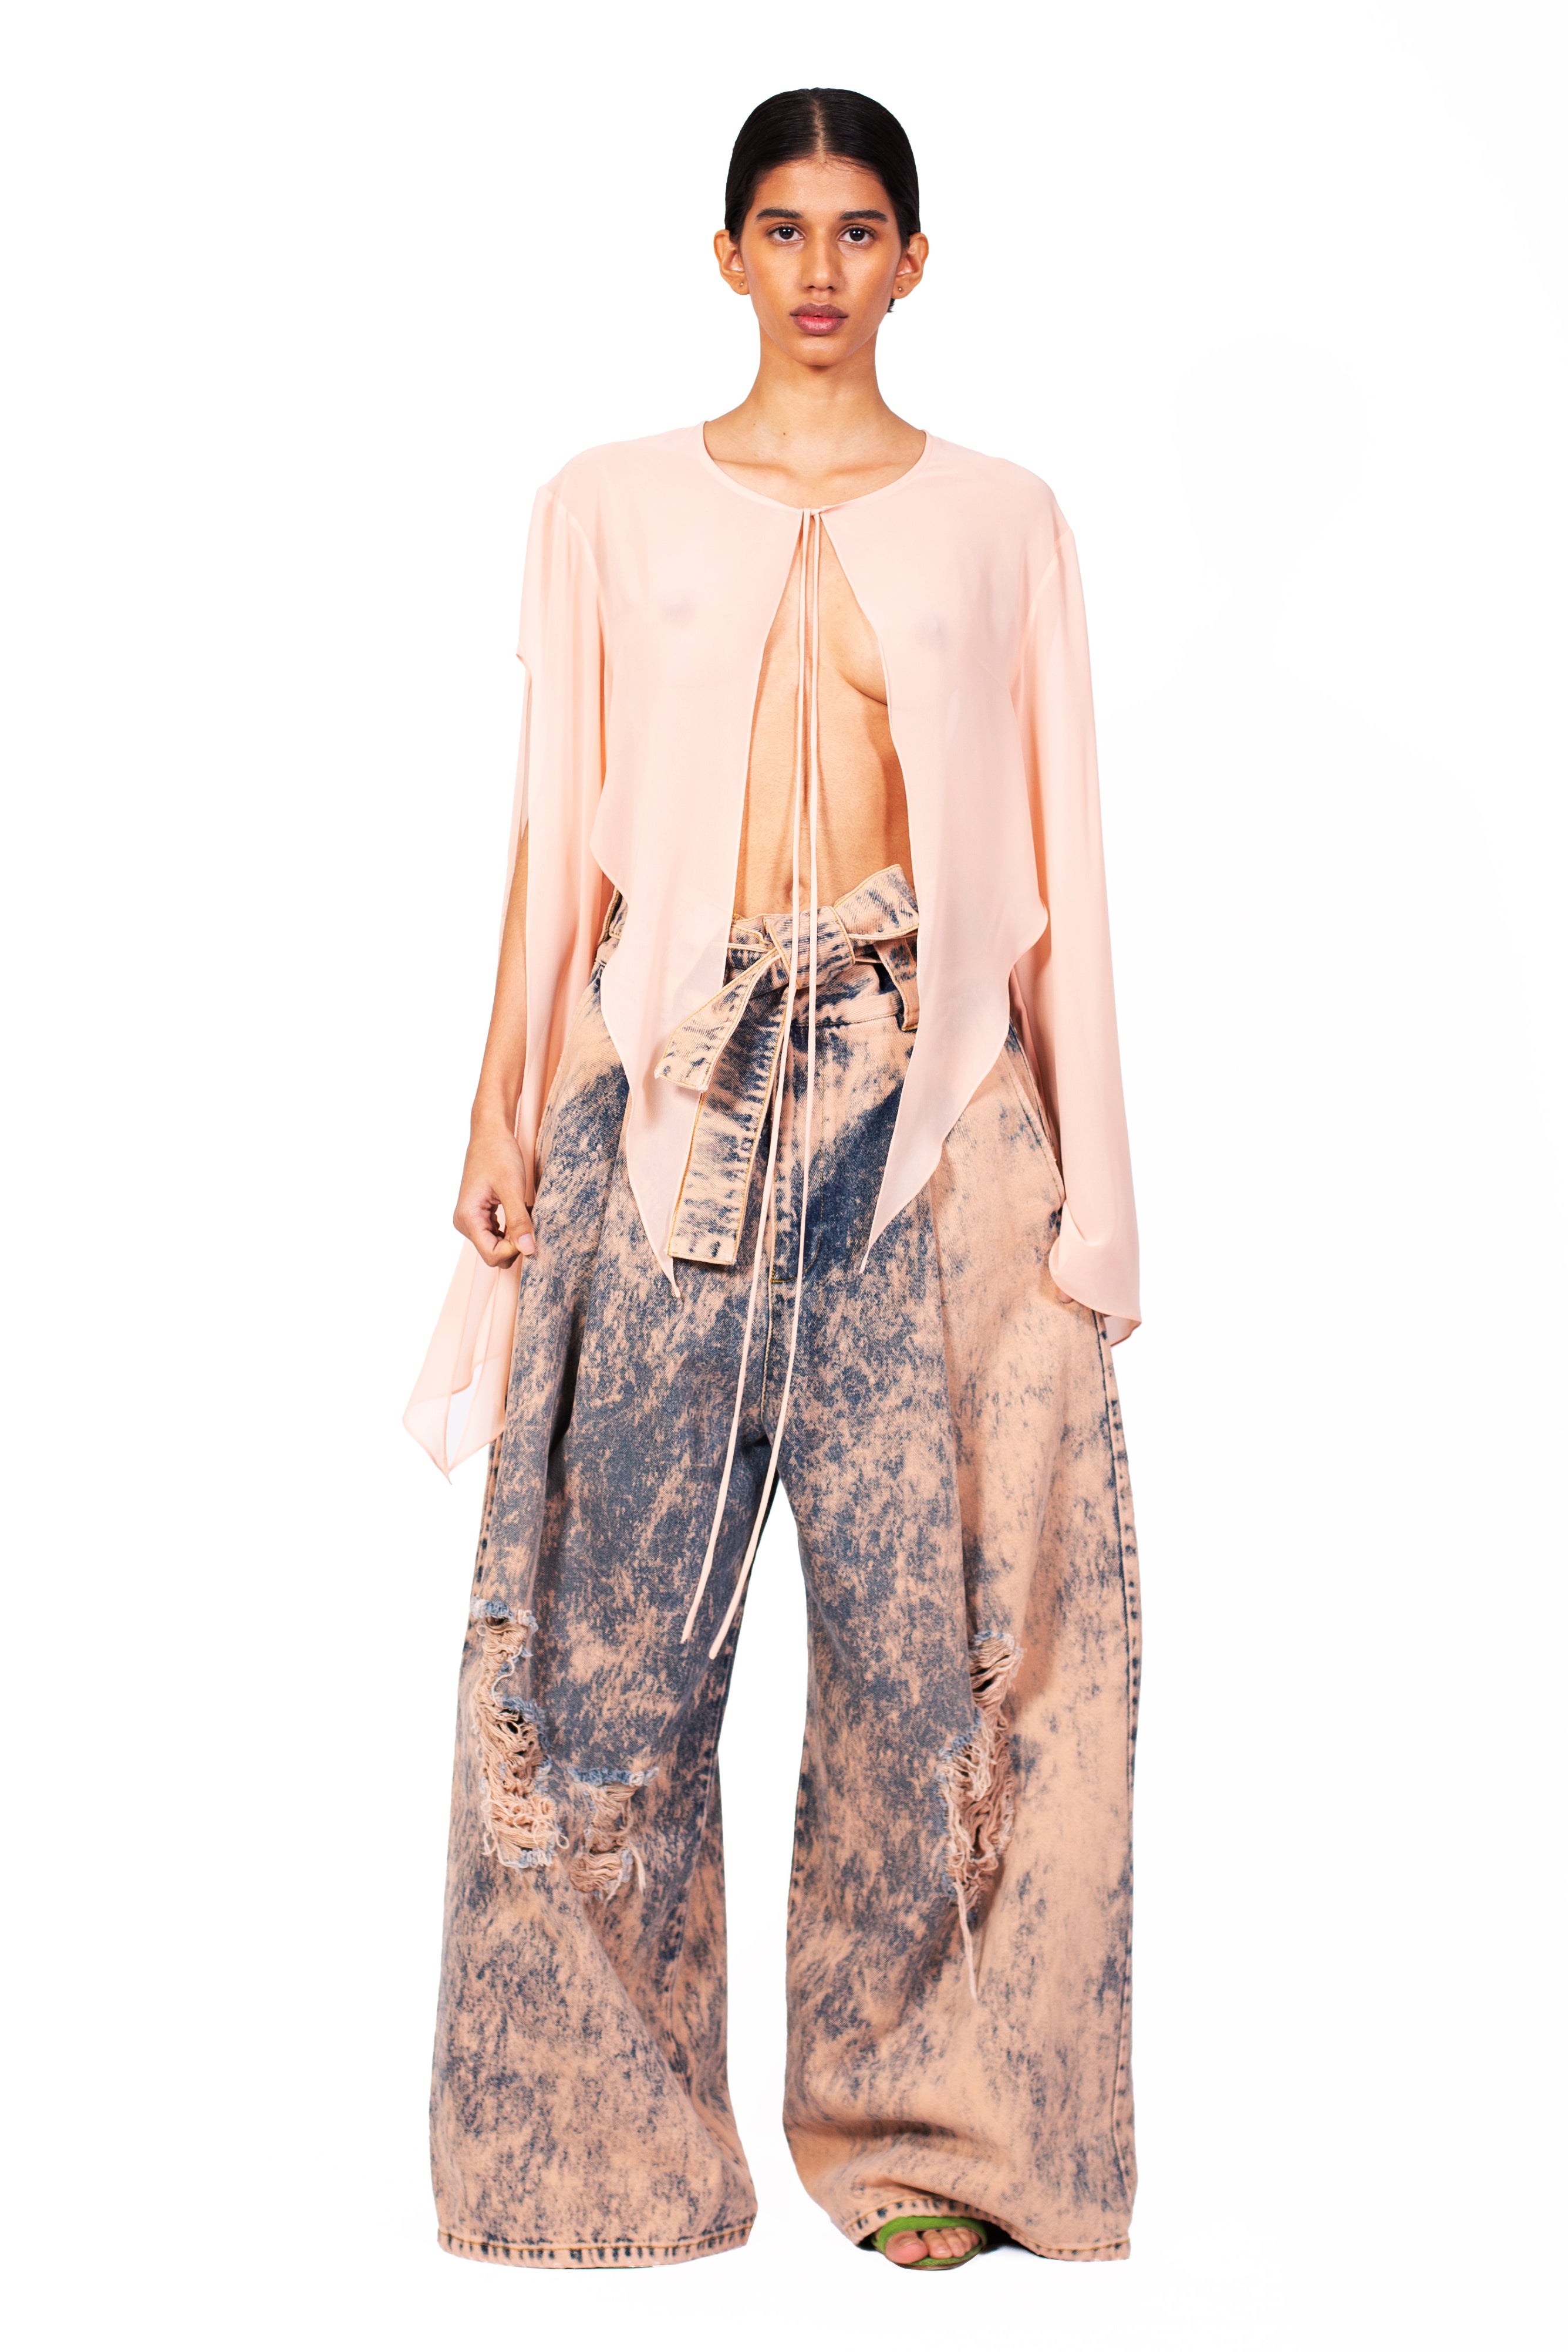 WIDE MARBLE PEACH JEANS